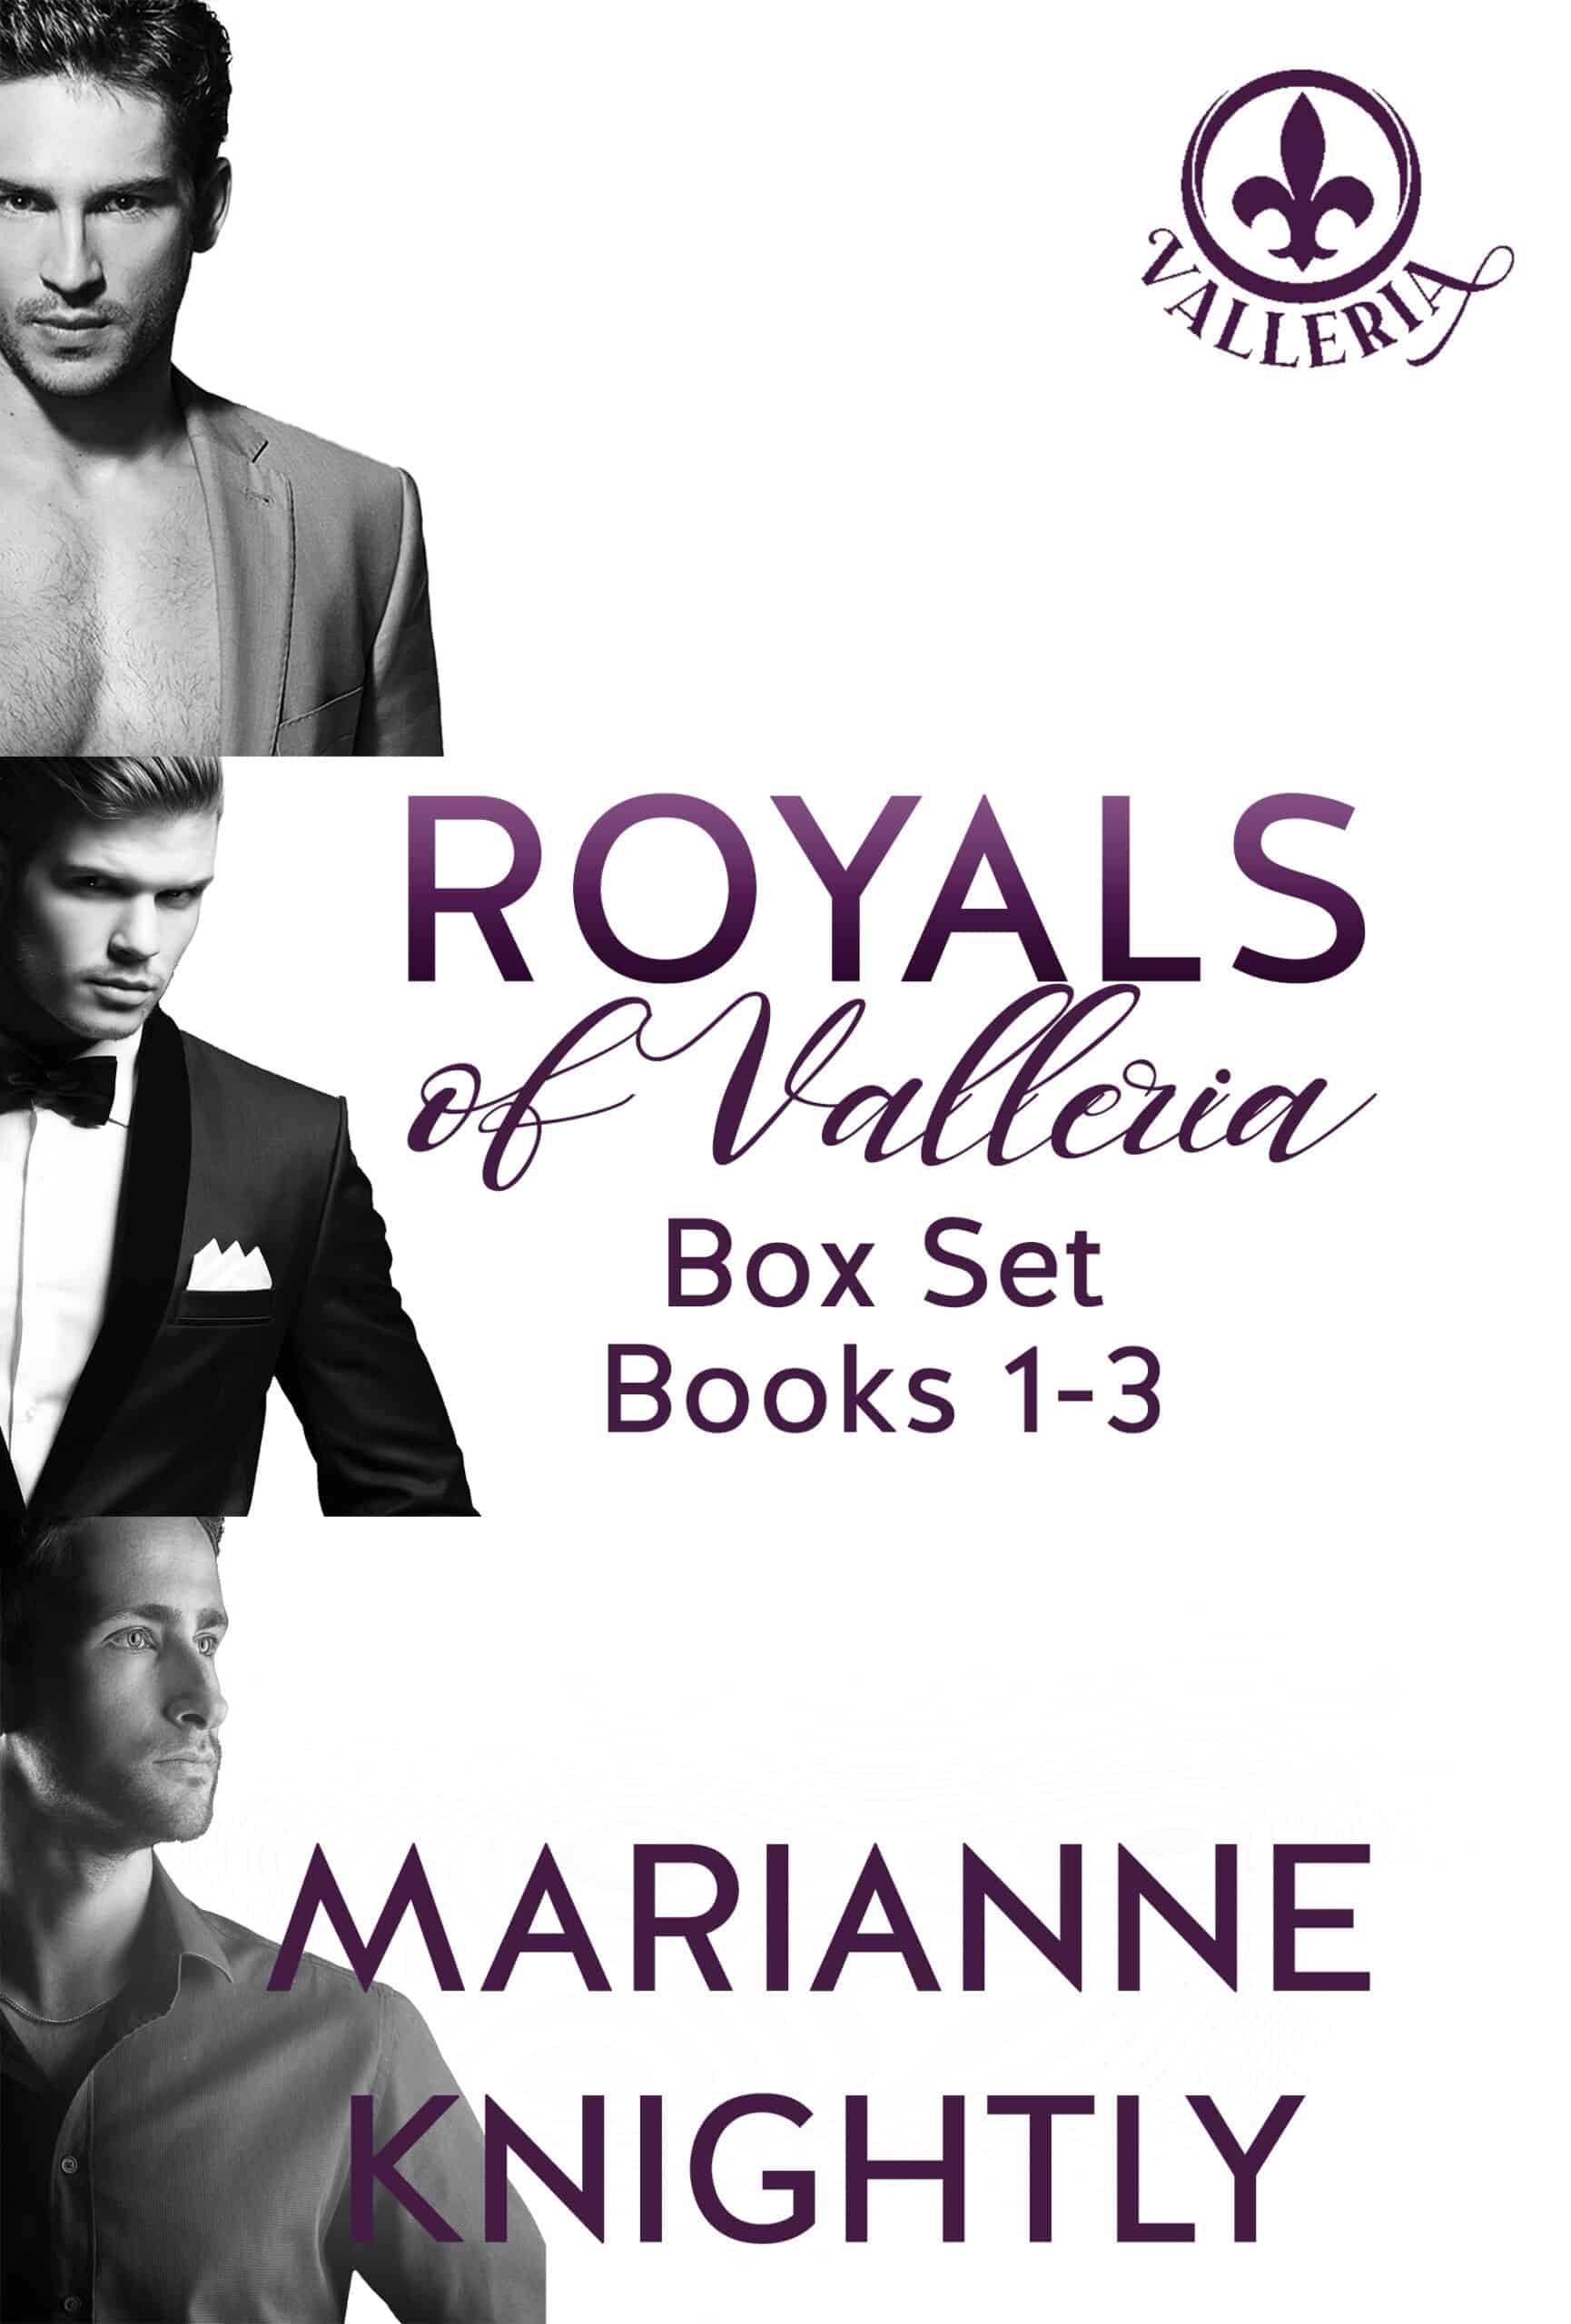 Royals of Valleria Box Set (Books 1-3) by Marianne Knightly